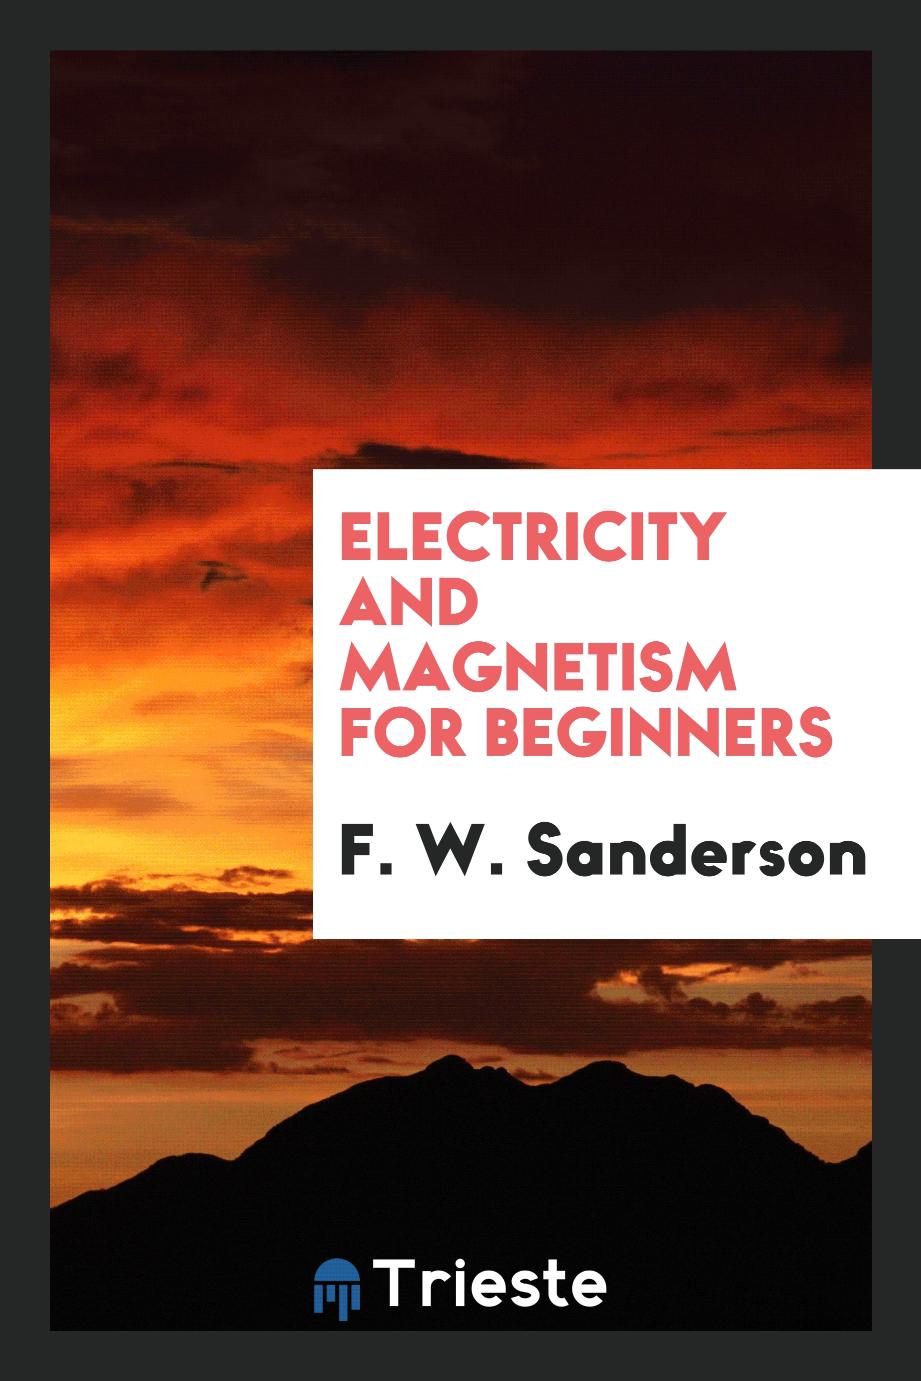 Electricity and magnetism for beginners